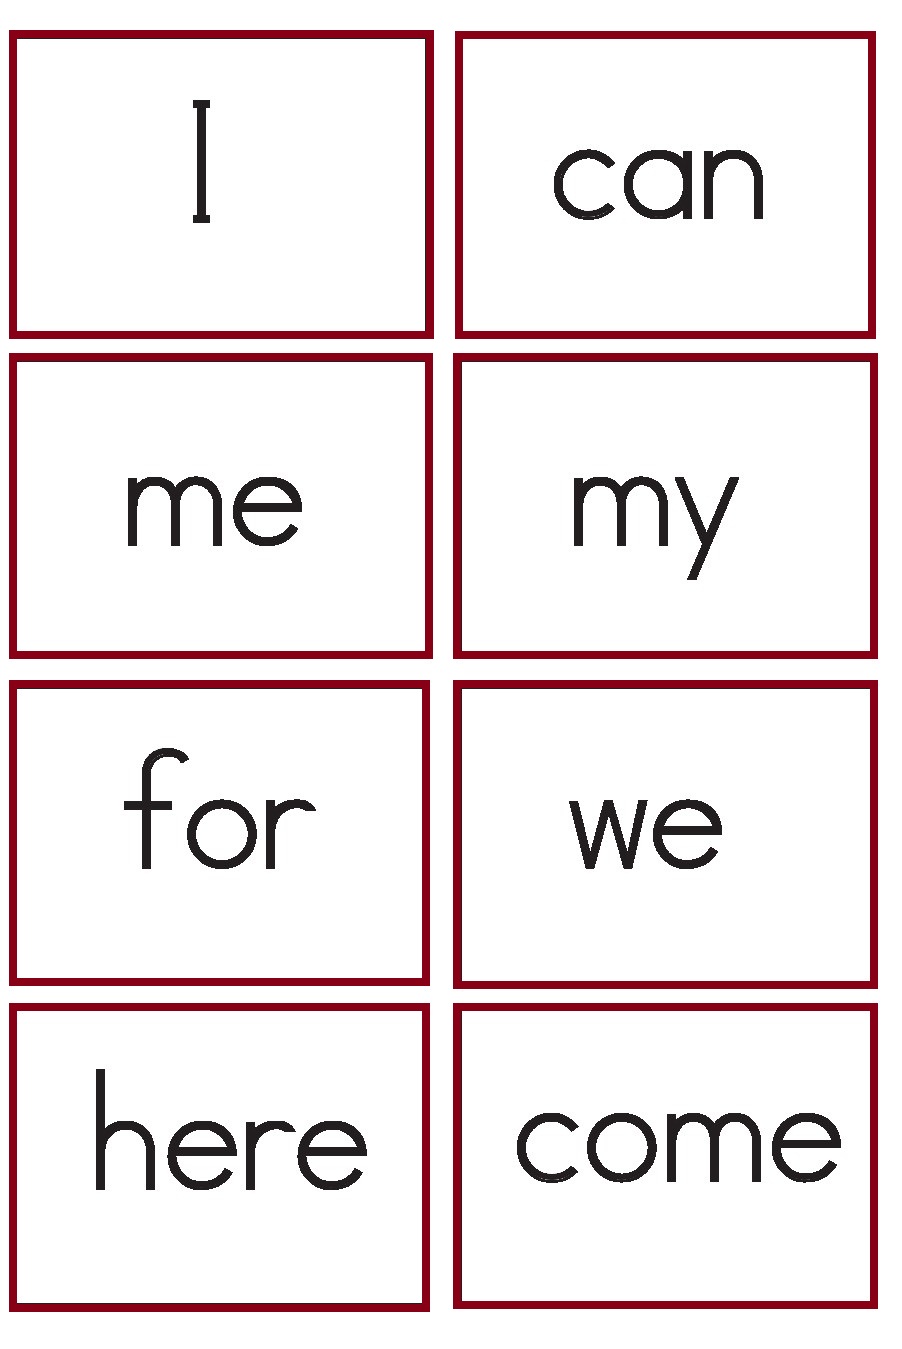 1220-best-images-about-phonics-on-pinterest-word-families-teaching